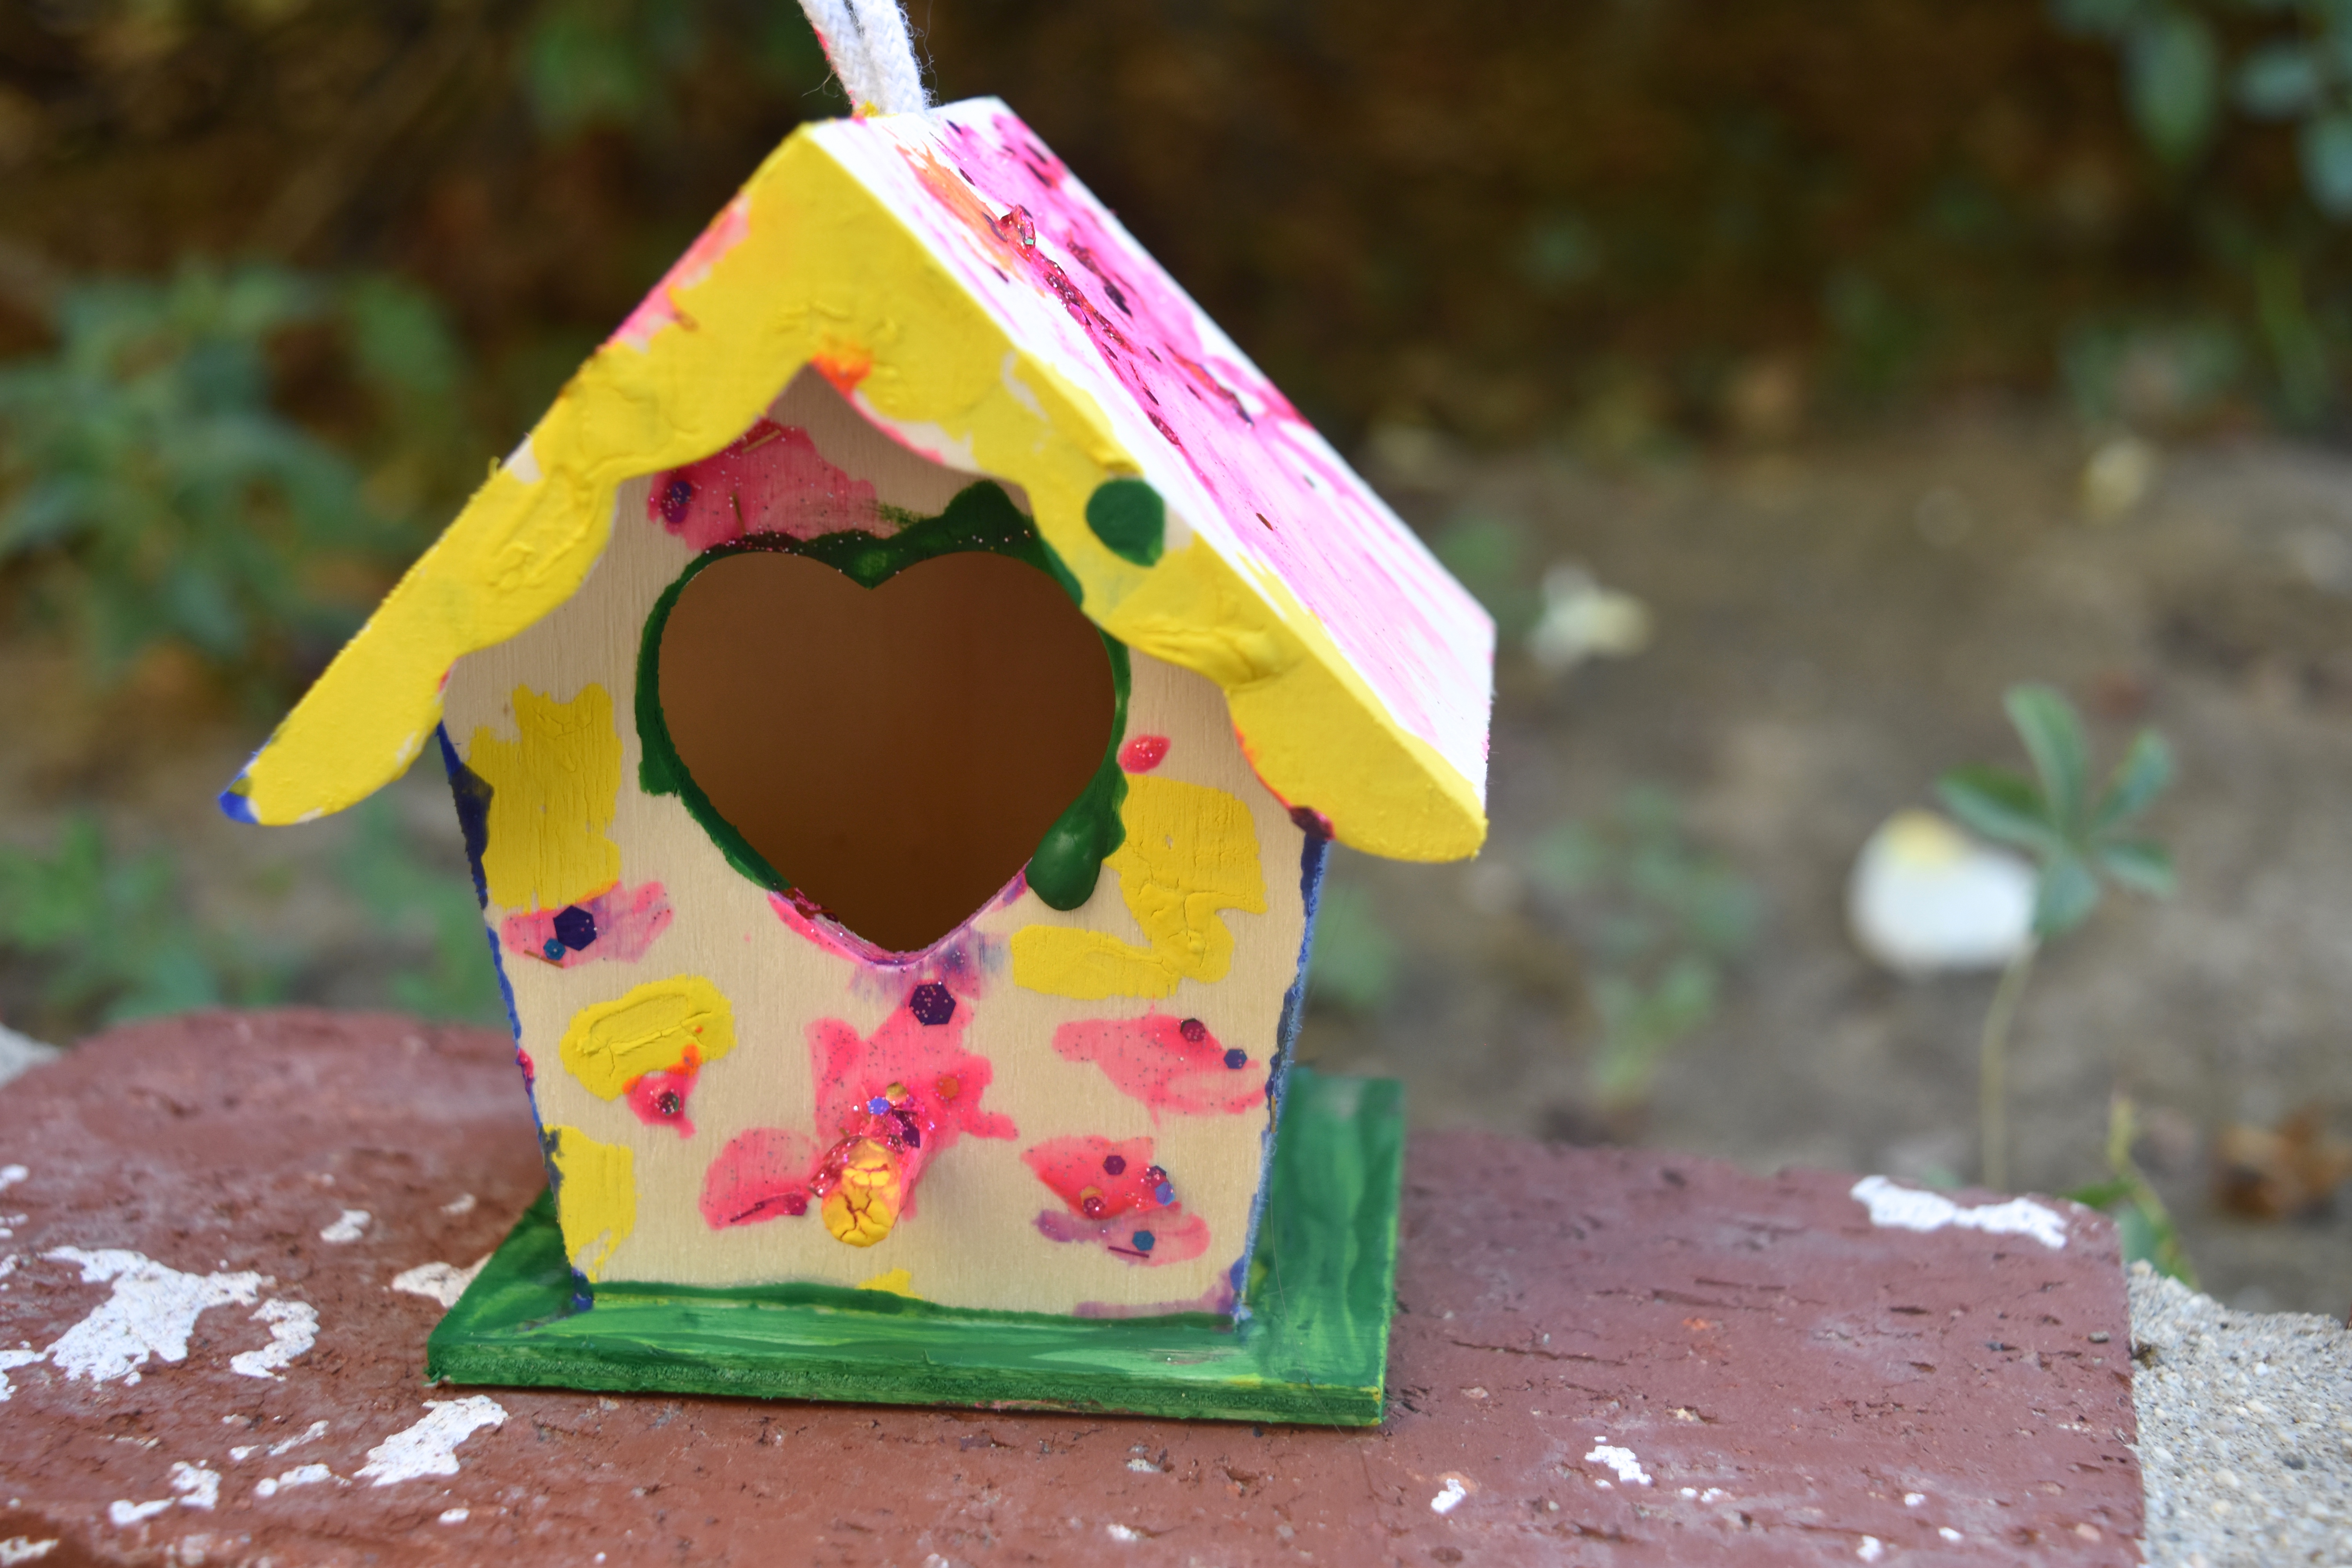 Painted bird house from Michael's Arts and Crafts